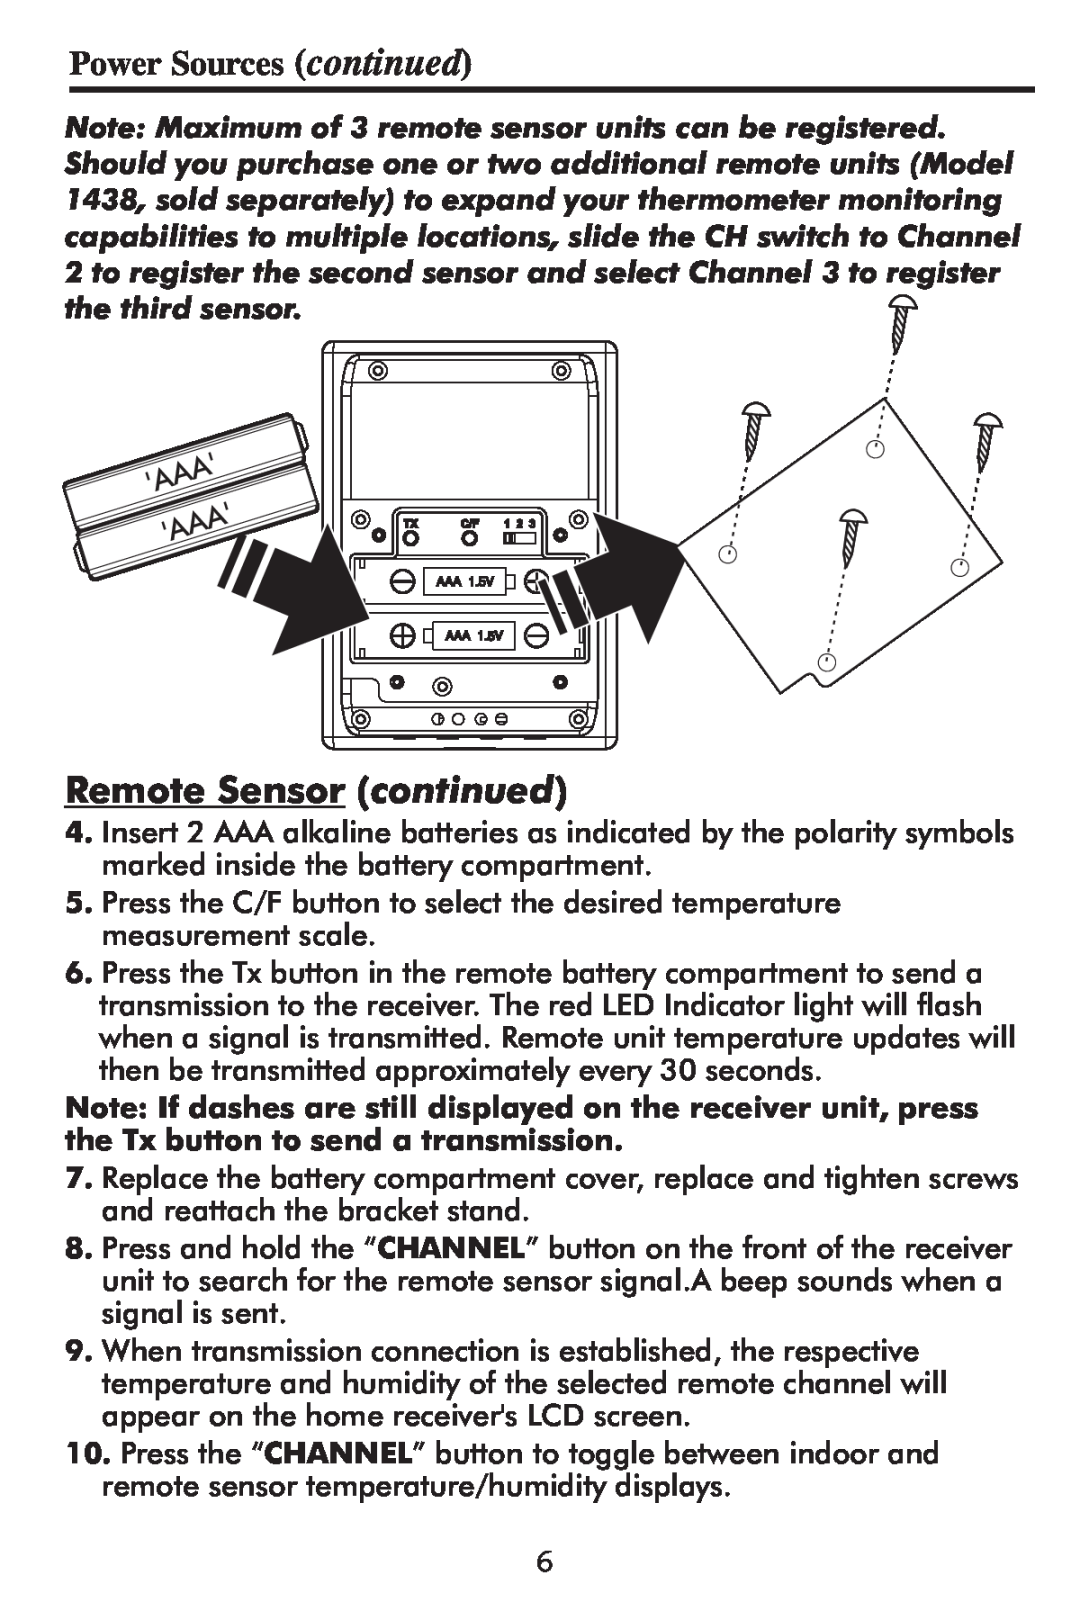 Taylor 1507 instruction manual Remote Sensor continued, Power Sources continued 